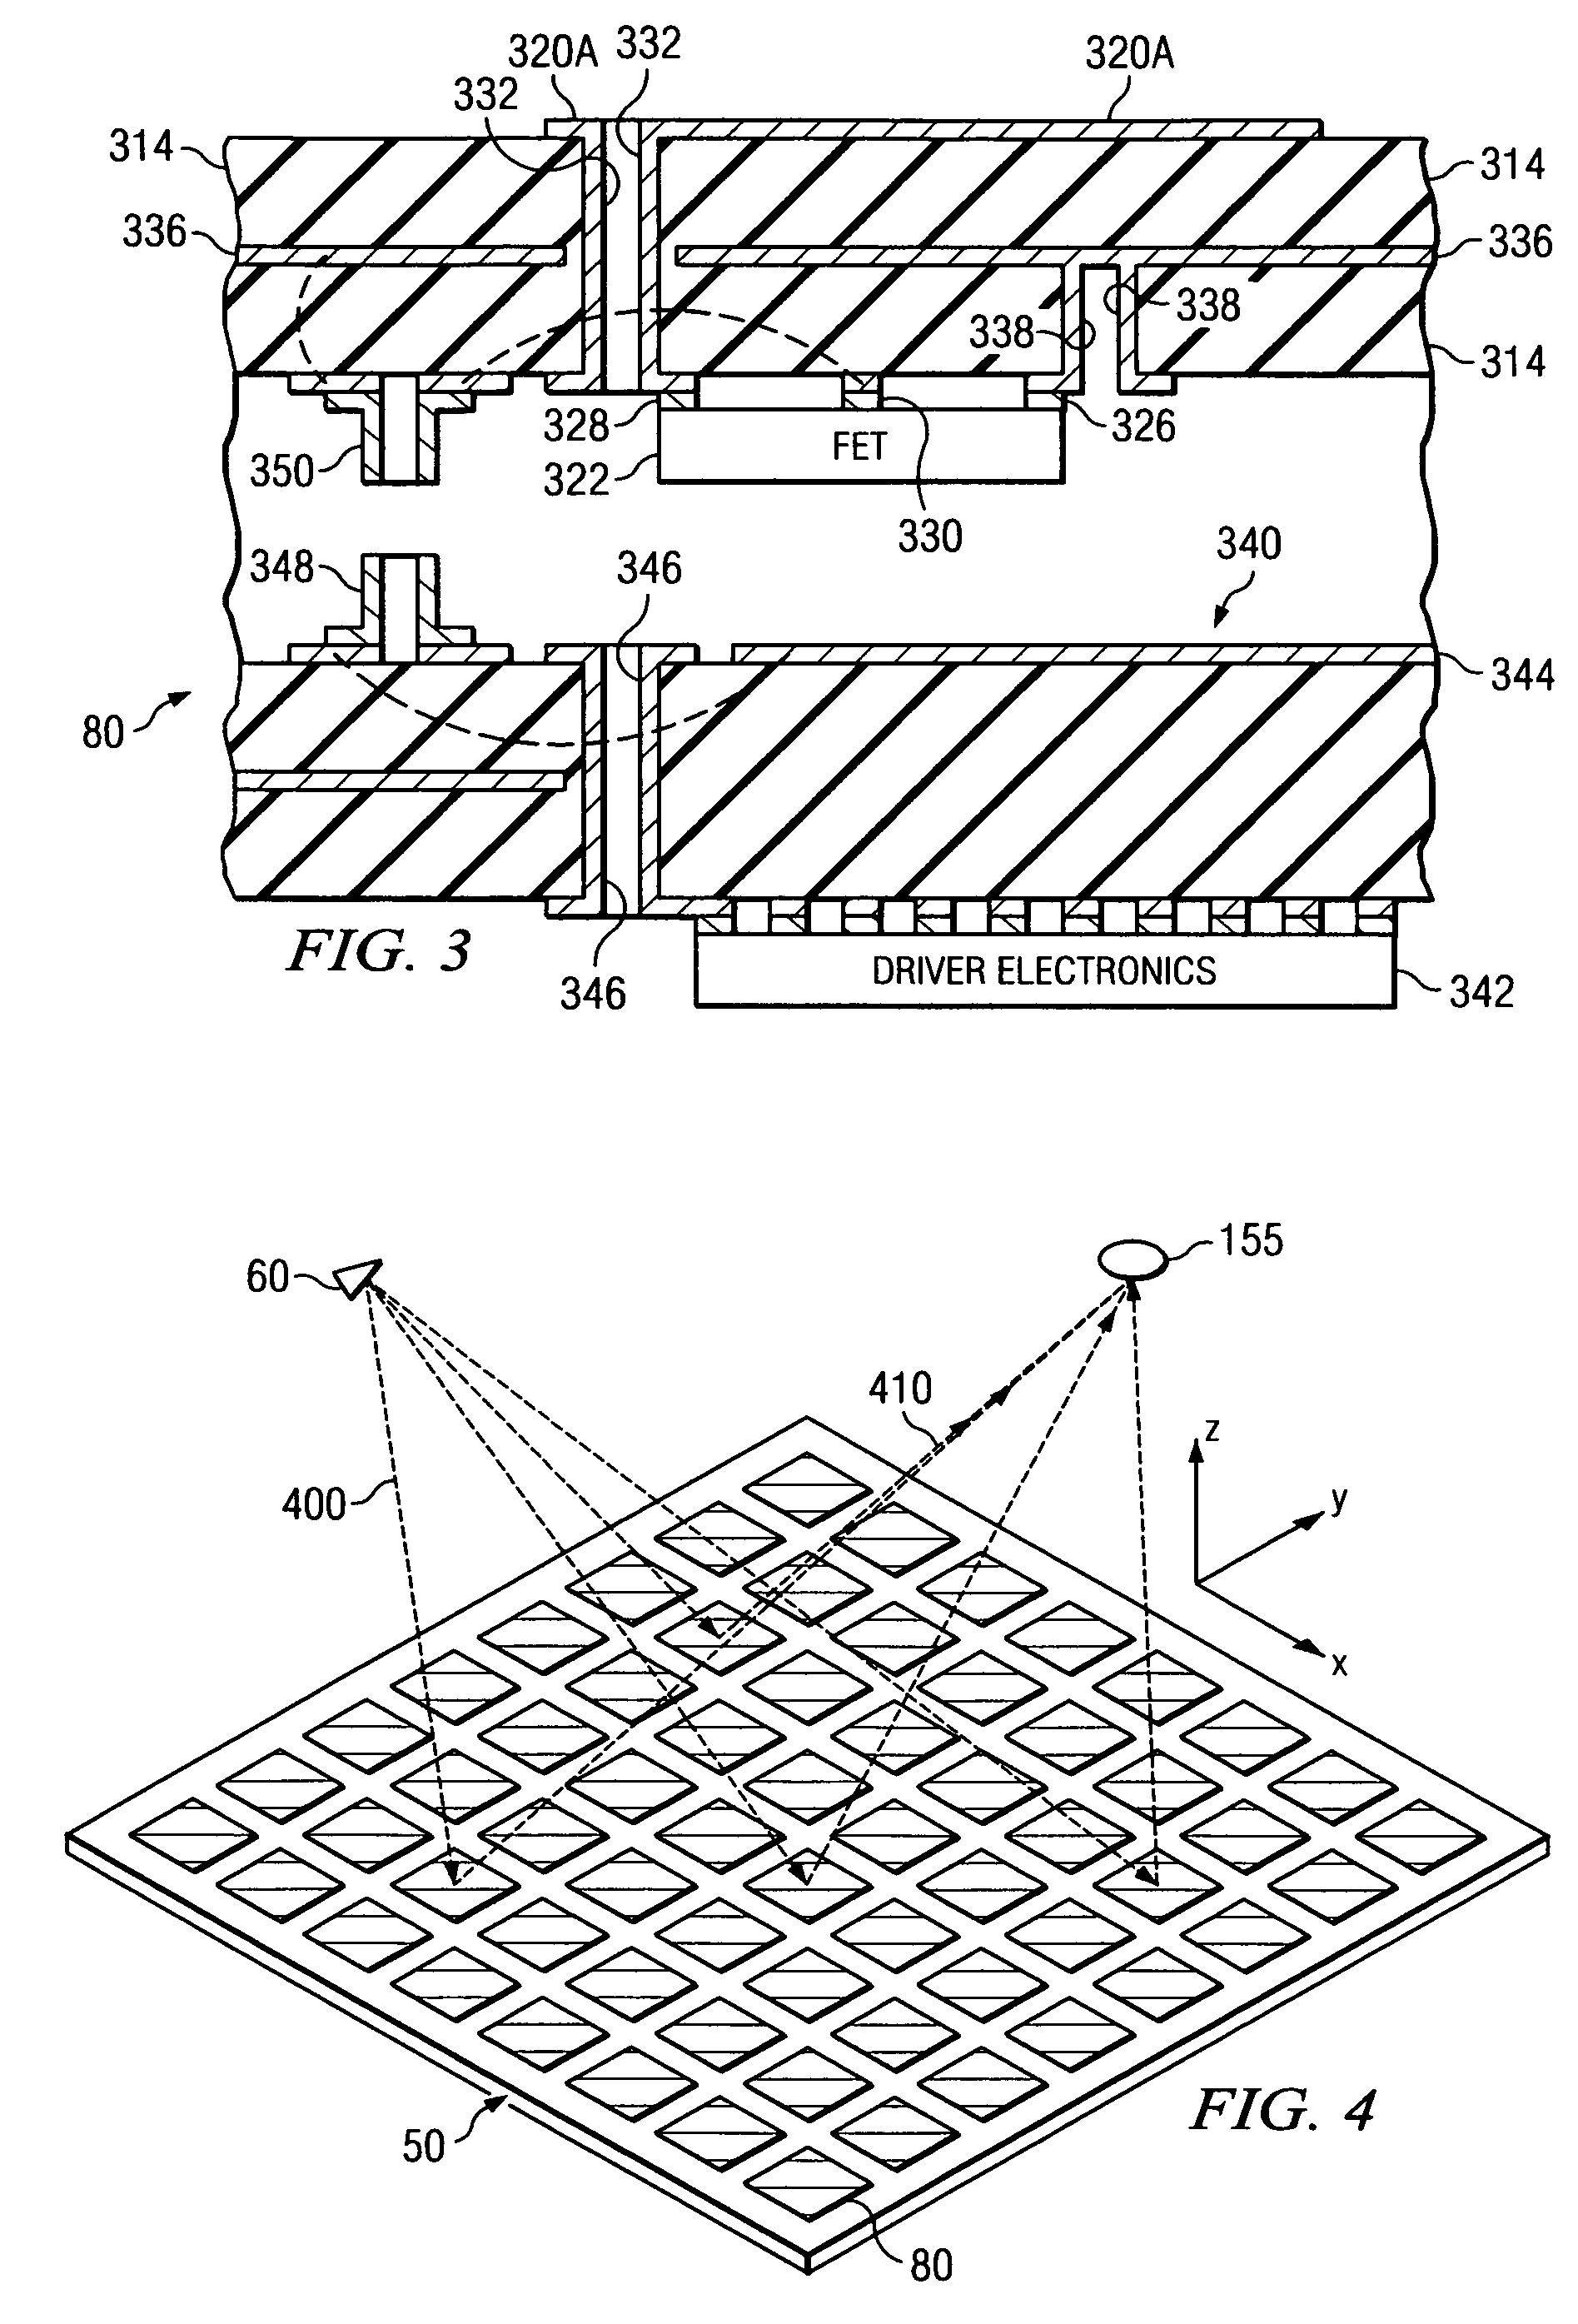 System and method for efficient, high-resolution microwave imaging using complementary transmit and receive beam patterns